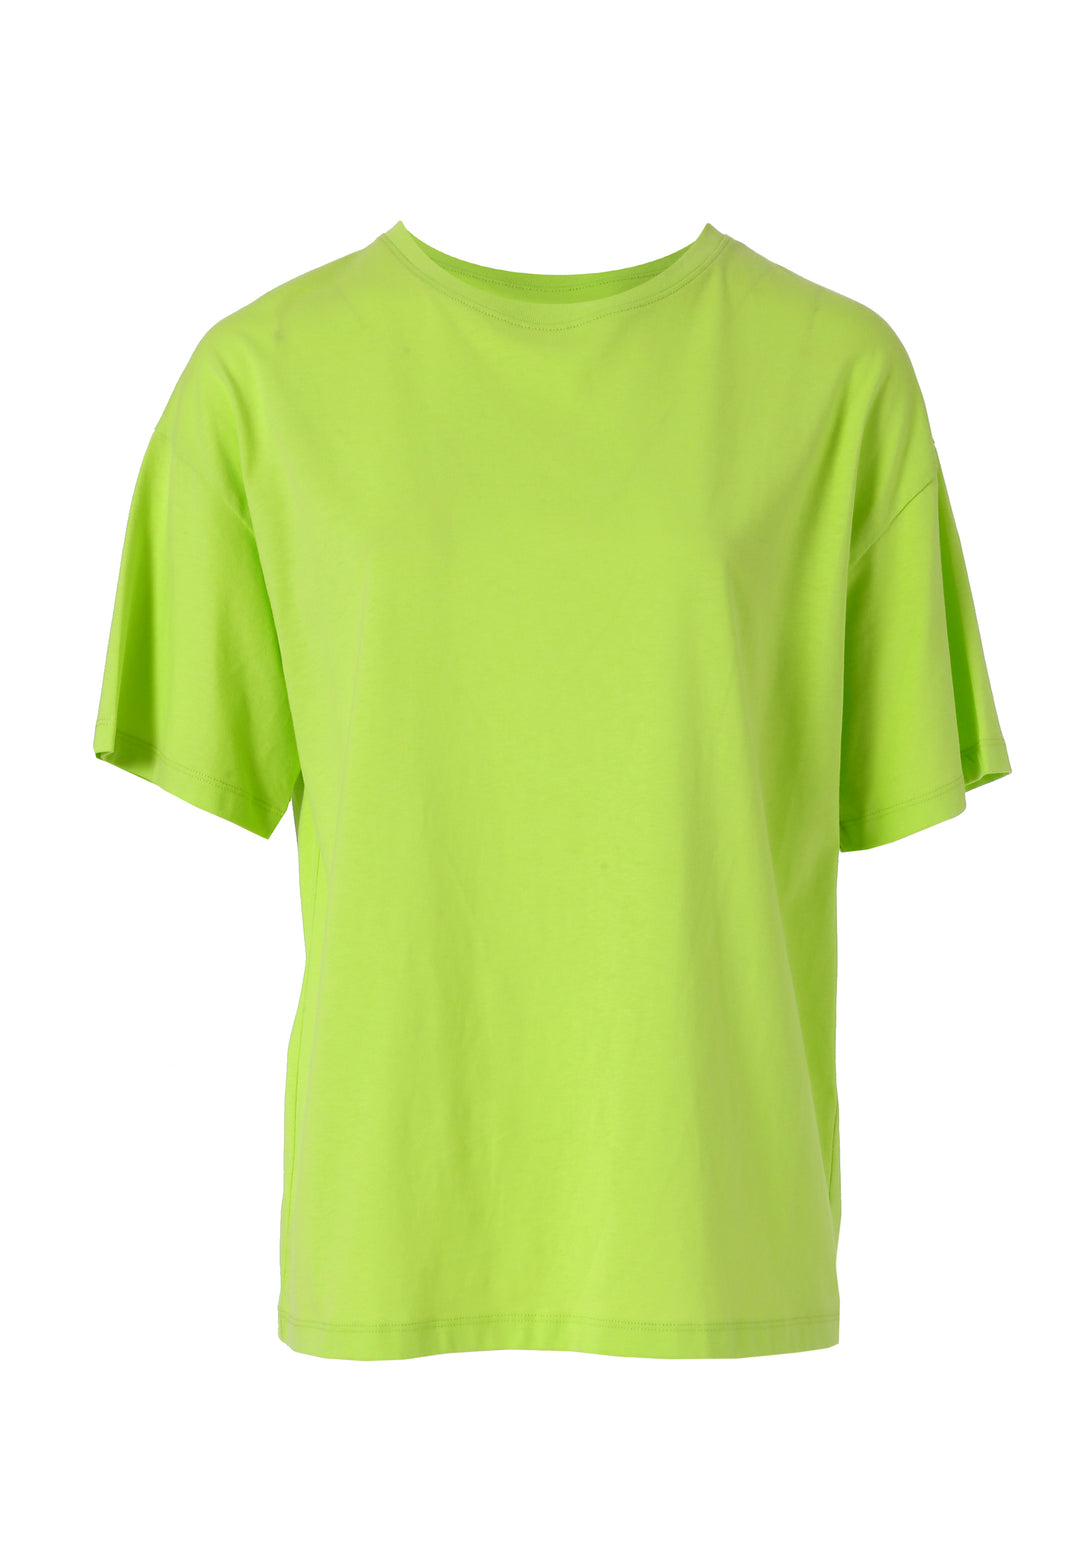 T-shirt wide fit made in cotton jersey Fracomina FP24ST3006J465N5-G48-1